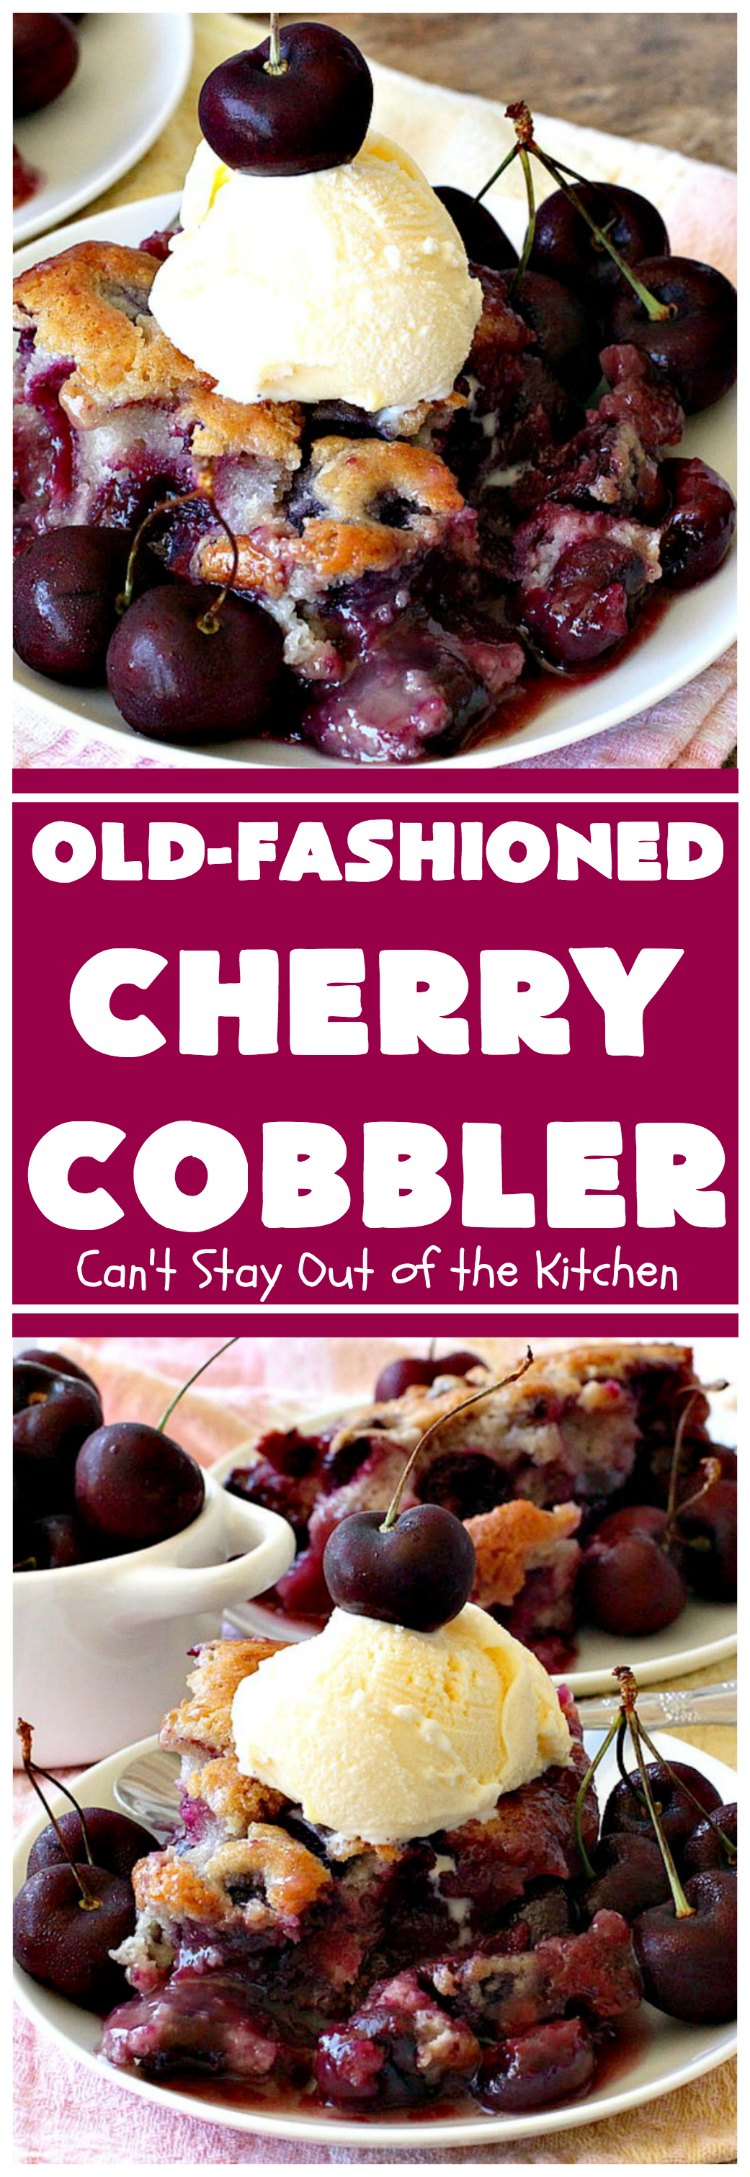 Old-Fashioned Cherry Cobbler | Can't Stay Out of the Kitchen